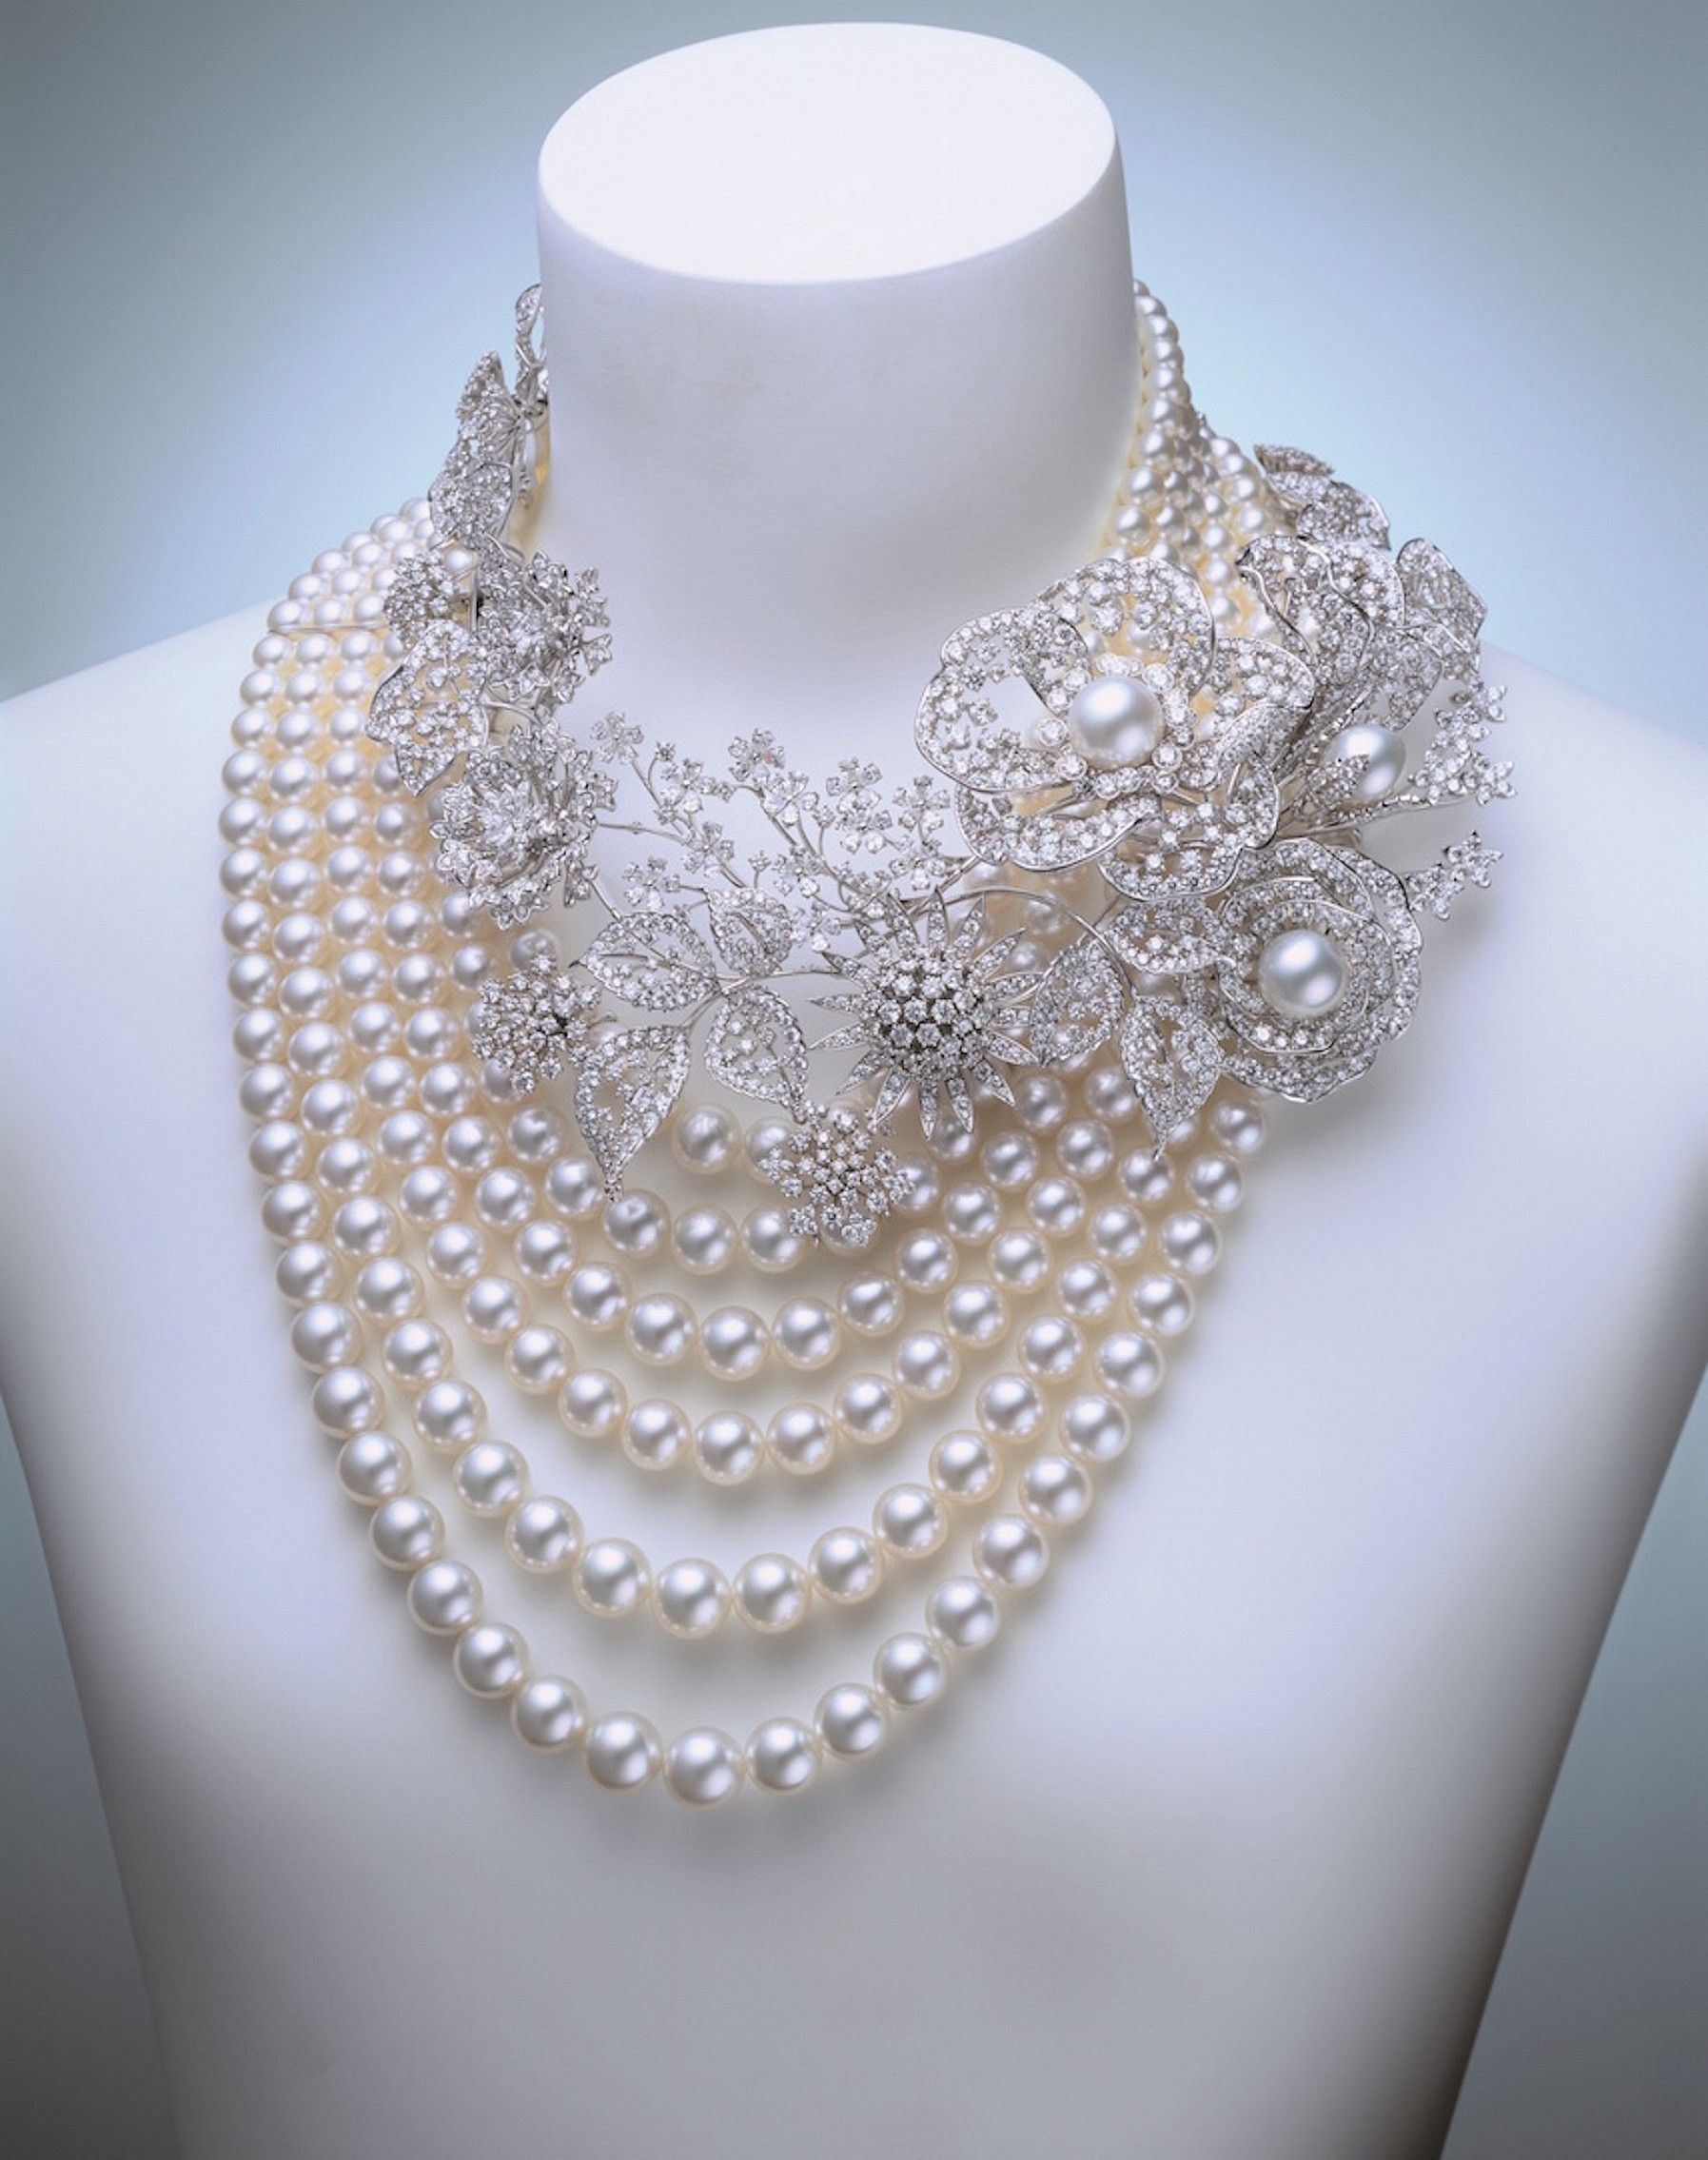 The Pearl Necklace Launches in Thailand - Robb Report Thailand